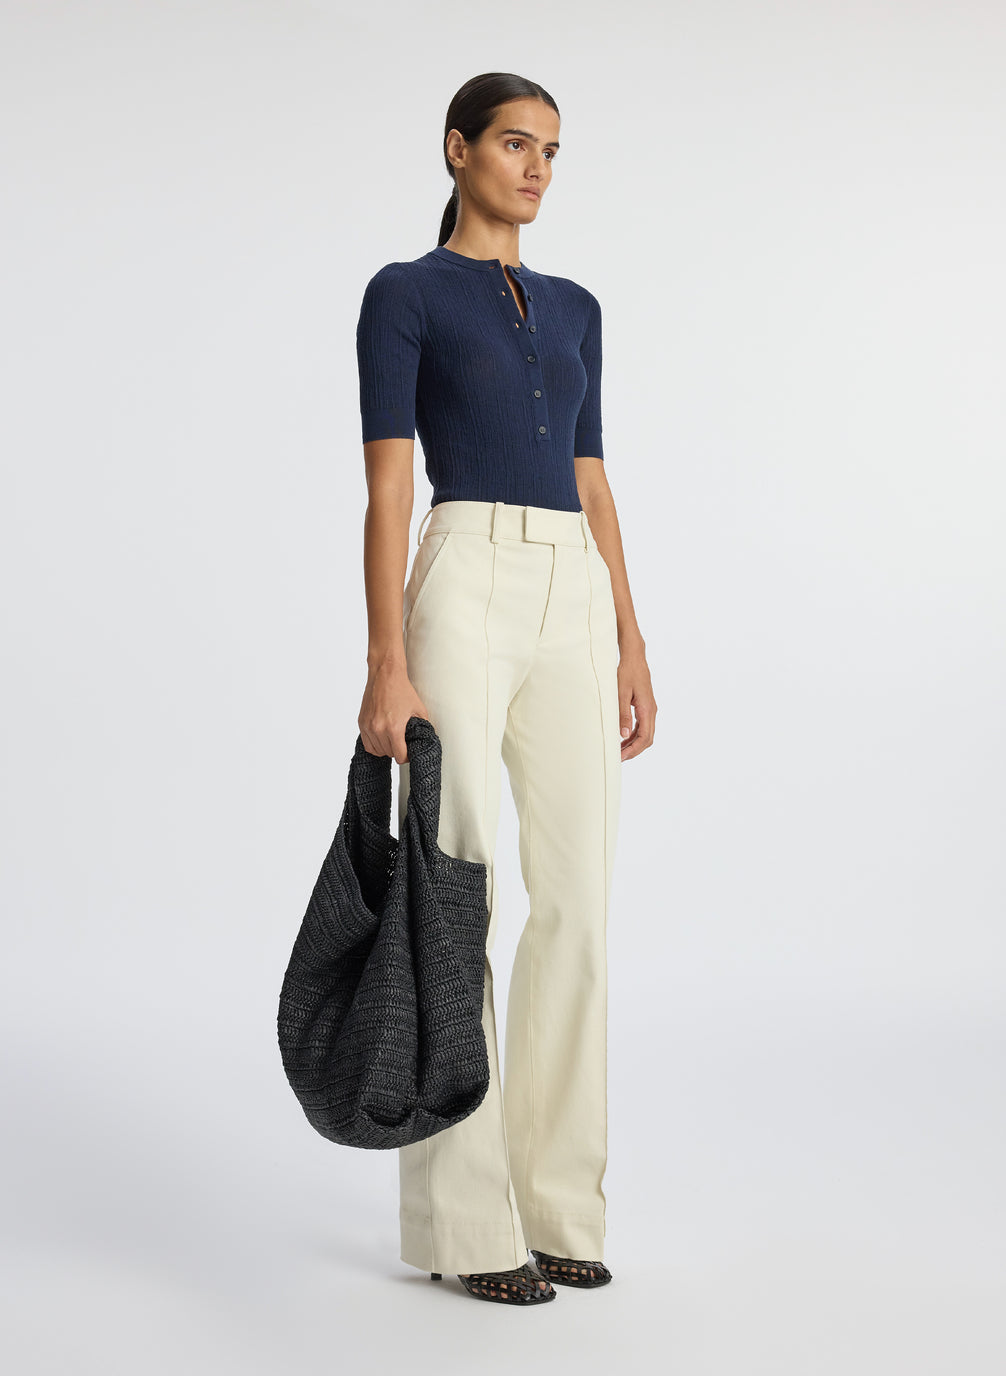 side view of woman wearing navy blue half sleeve button placket shirt and cream pants